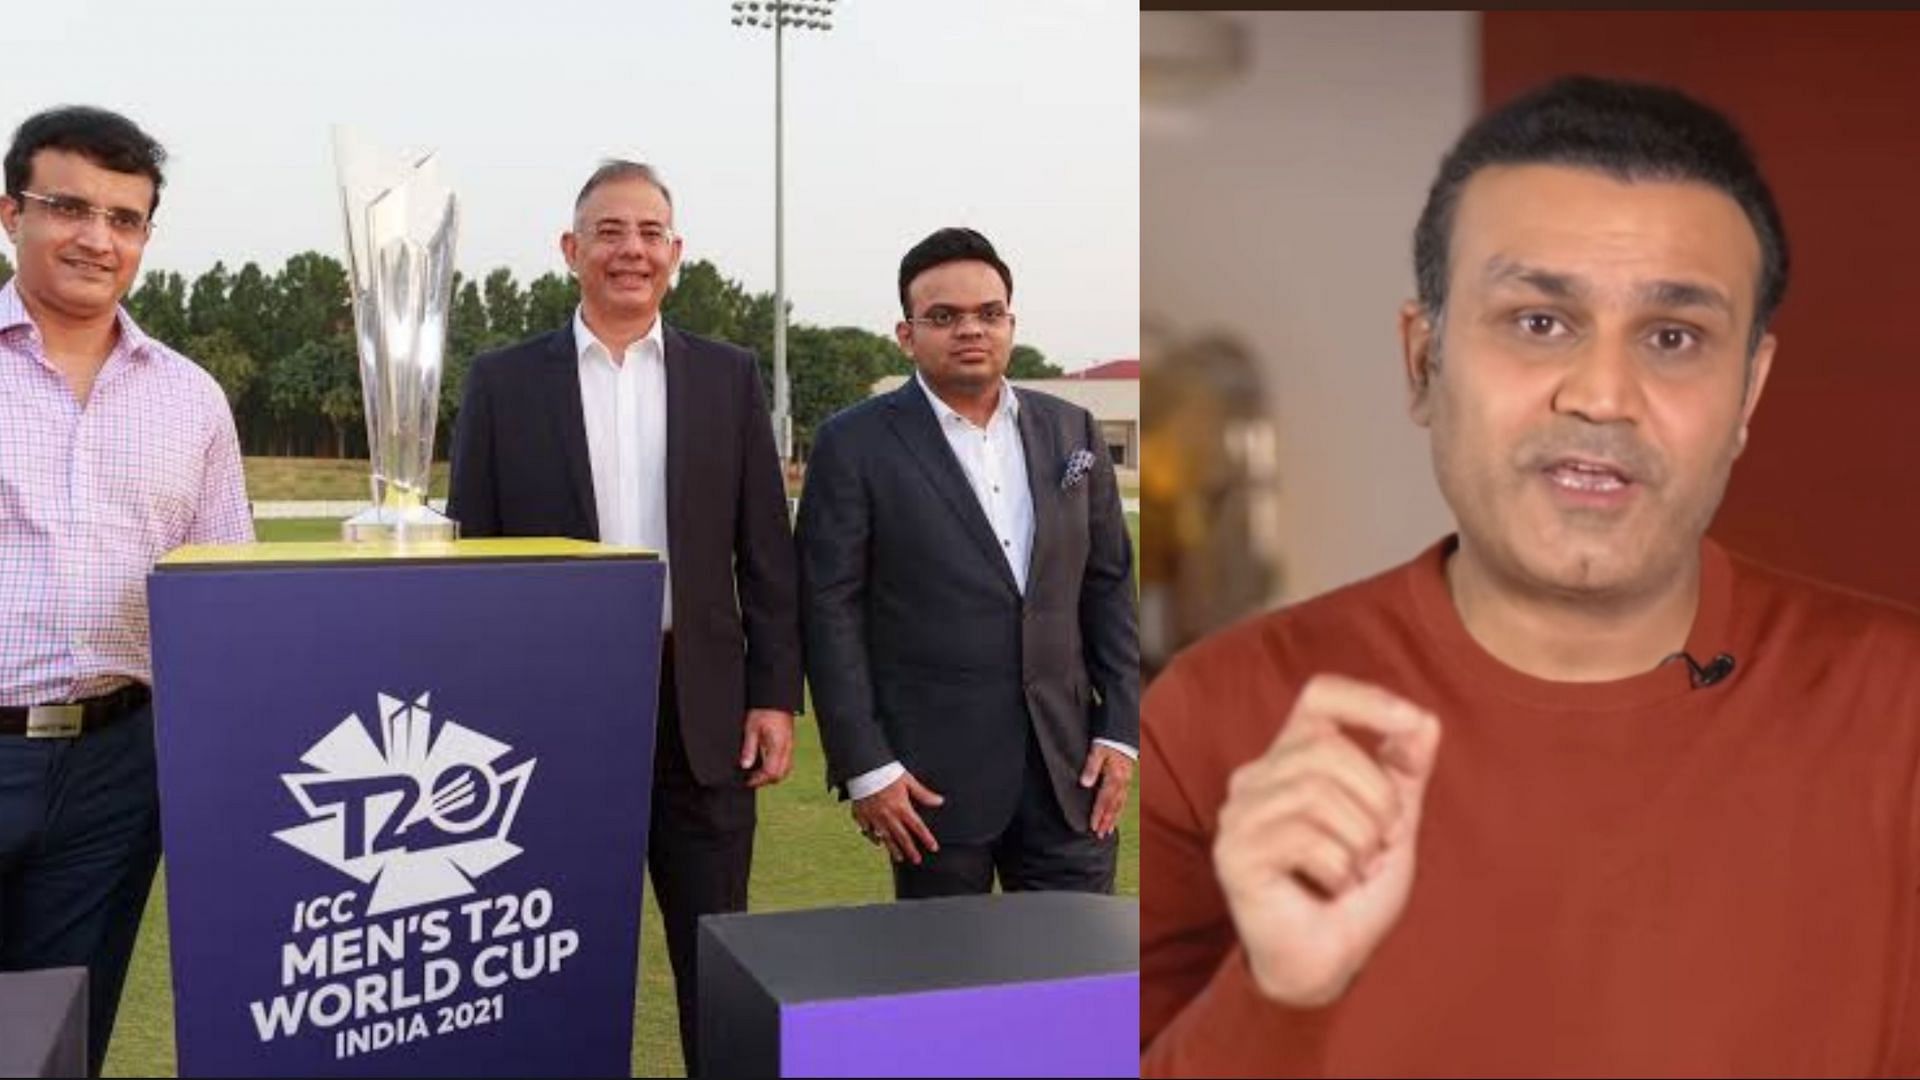 Virender Sehwag (R) has named his favorite for the ICC T20 World Cup 2021 trophy